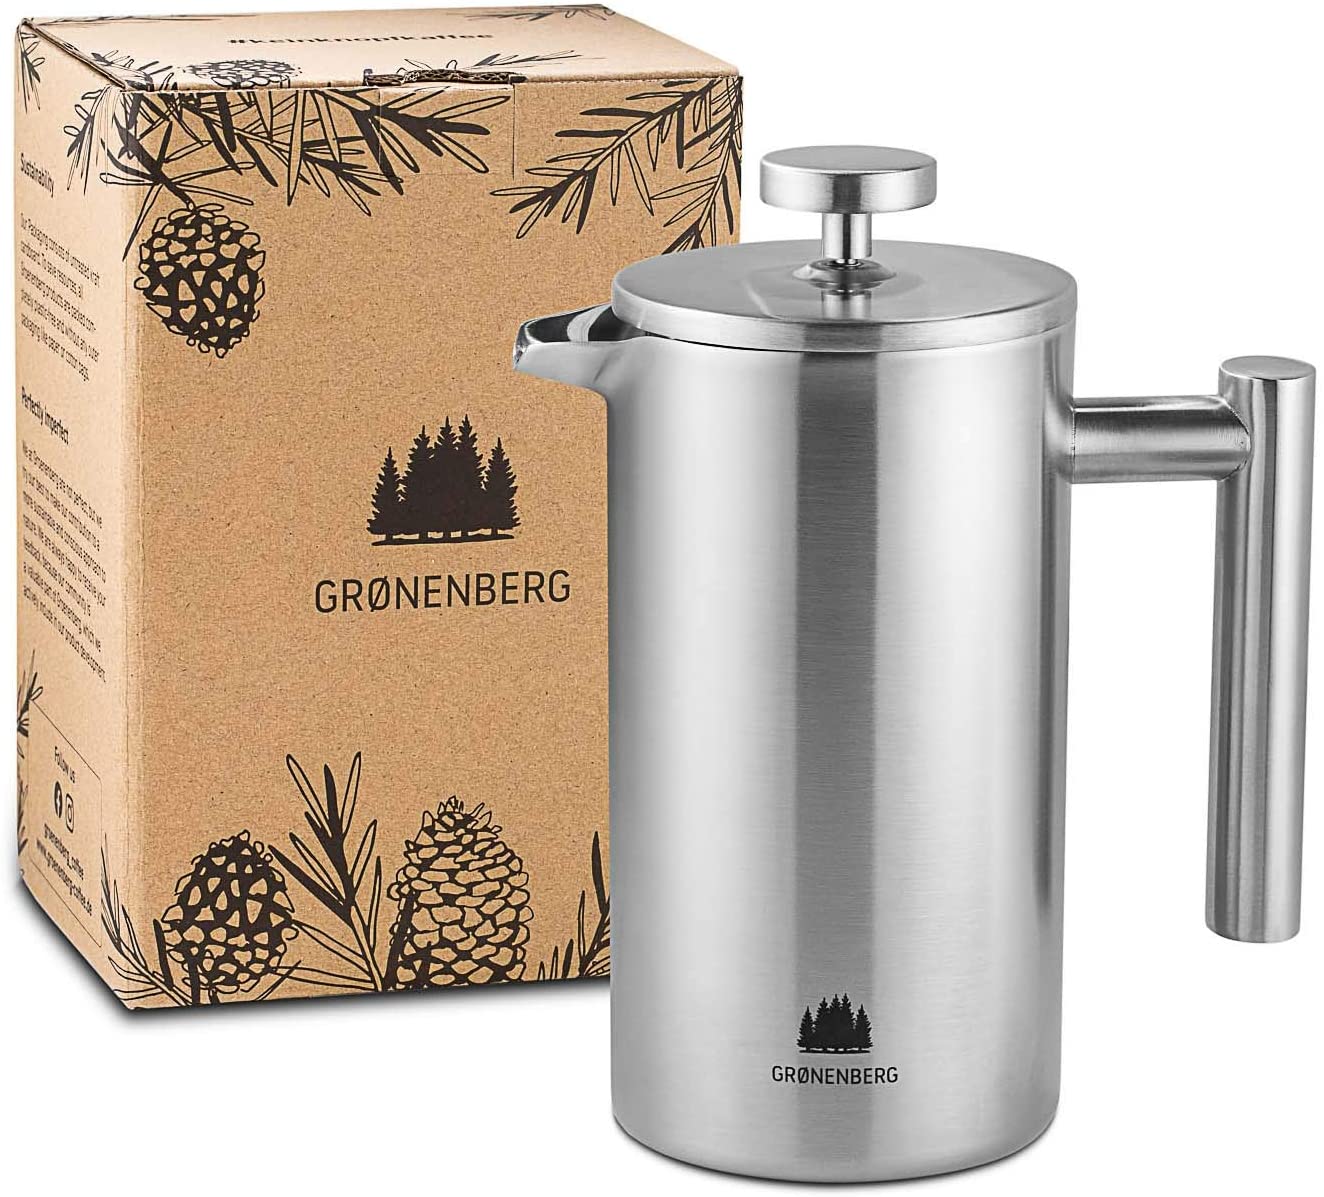 Groenenberg French Press, Stainless Steel, 0.35-1 Litre (2-5 Cups) Coffee Maker, Double-Walled Insulated, Coffee Press Incl. Replacement Filters & Step-by-Step Instructions (English Language Not Guaranteed), Coffee Press, Dishwasher Safe